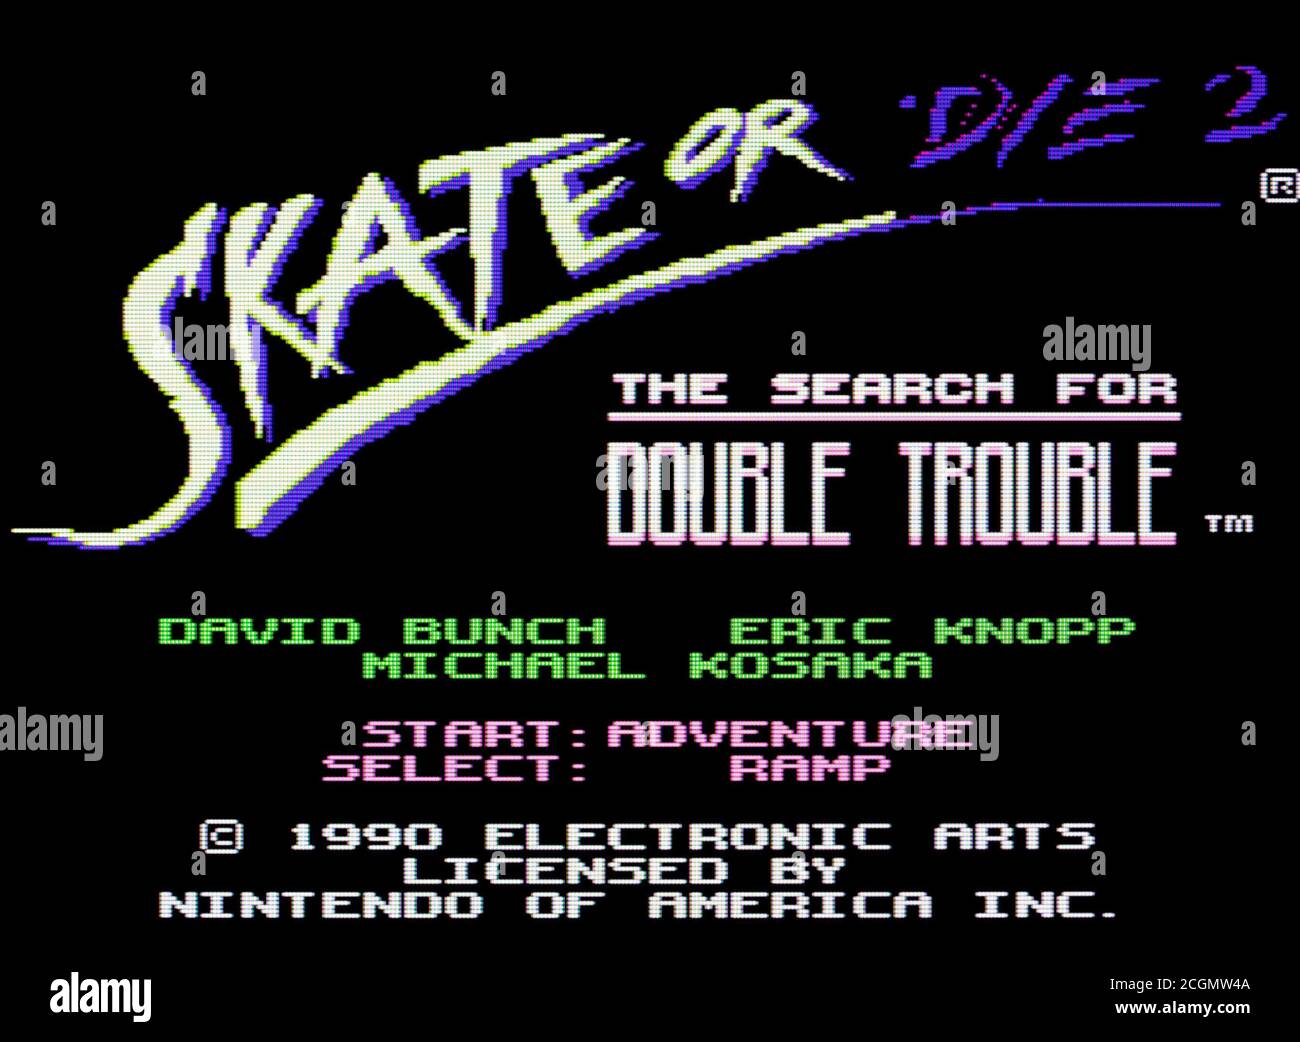 Skate or Die 2 - Nintendo Entertainment System - NES Videogame - Editorial  use only Stock Photo - Alamy